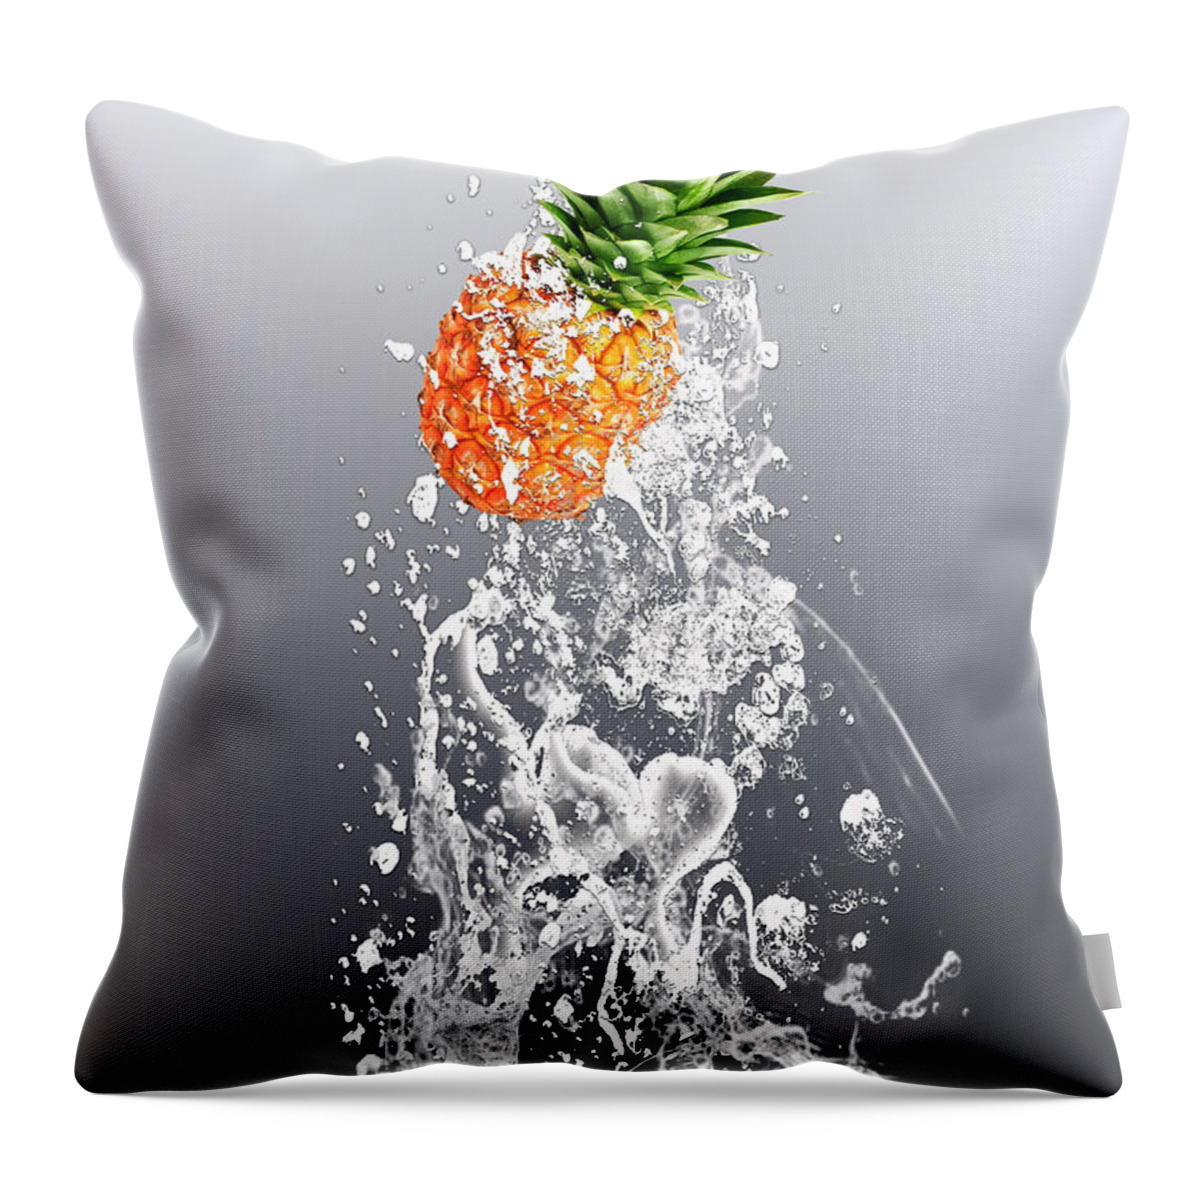 Pineapple Throw Pillow featuring the mixed media Pineapple Splash #3 by Marvin Blaine